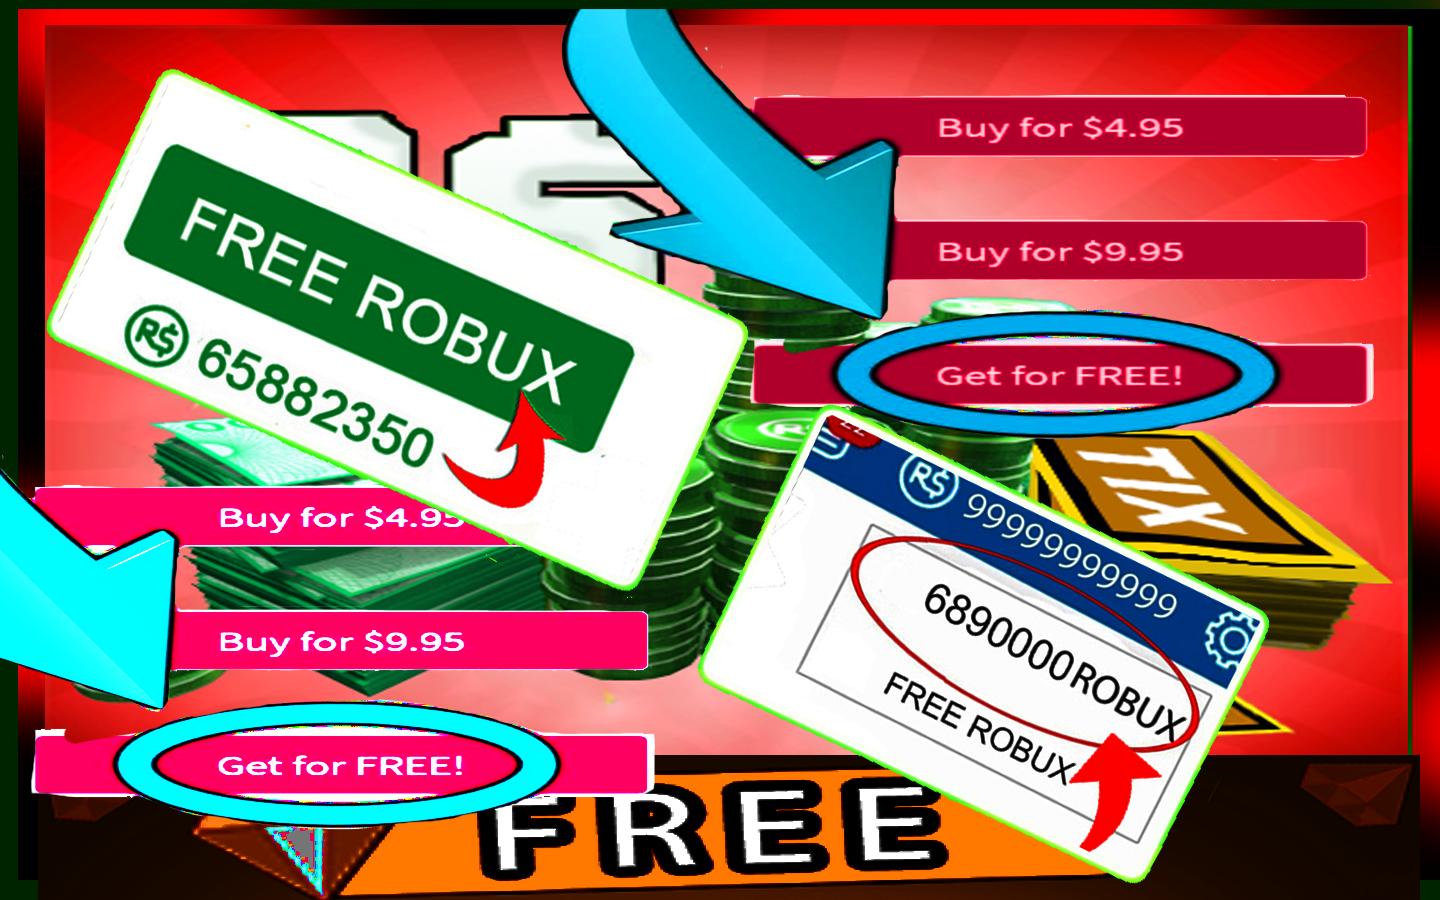 Guide Free Robux Counter Free Rbx 2020 Tips For Android Apk Download - get free robux guide counter roblox tips 2020 apk app